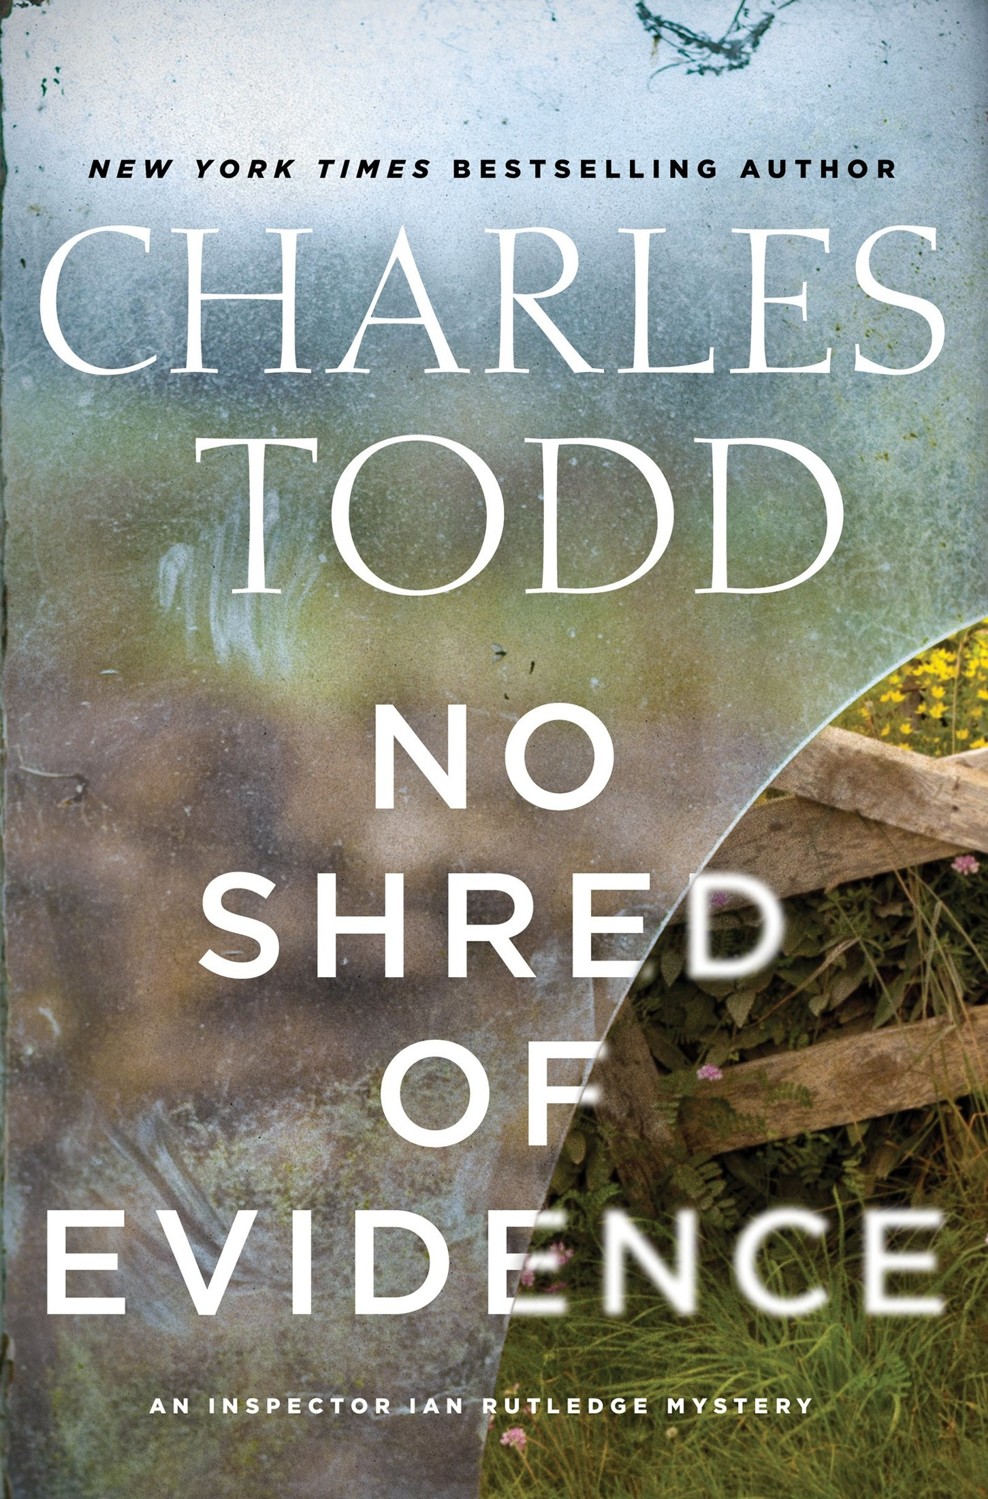 No Shred of Evidence: An Inspector Ian Rutledge Mystery by Charles Todd